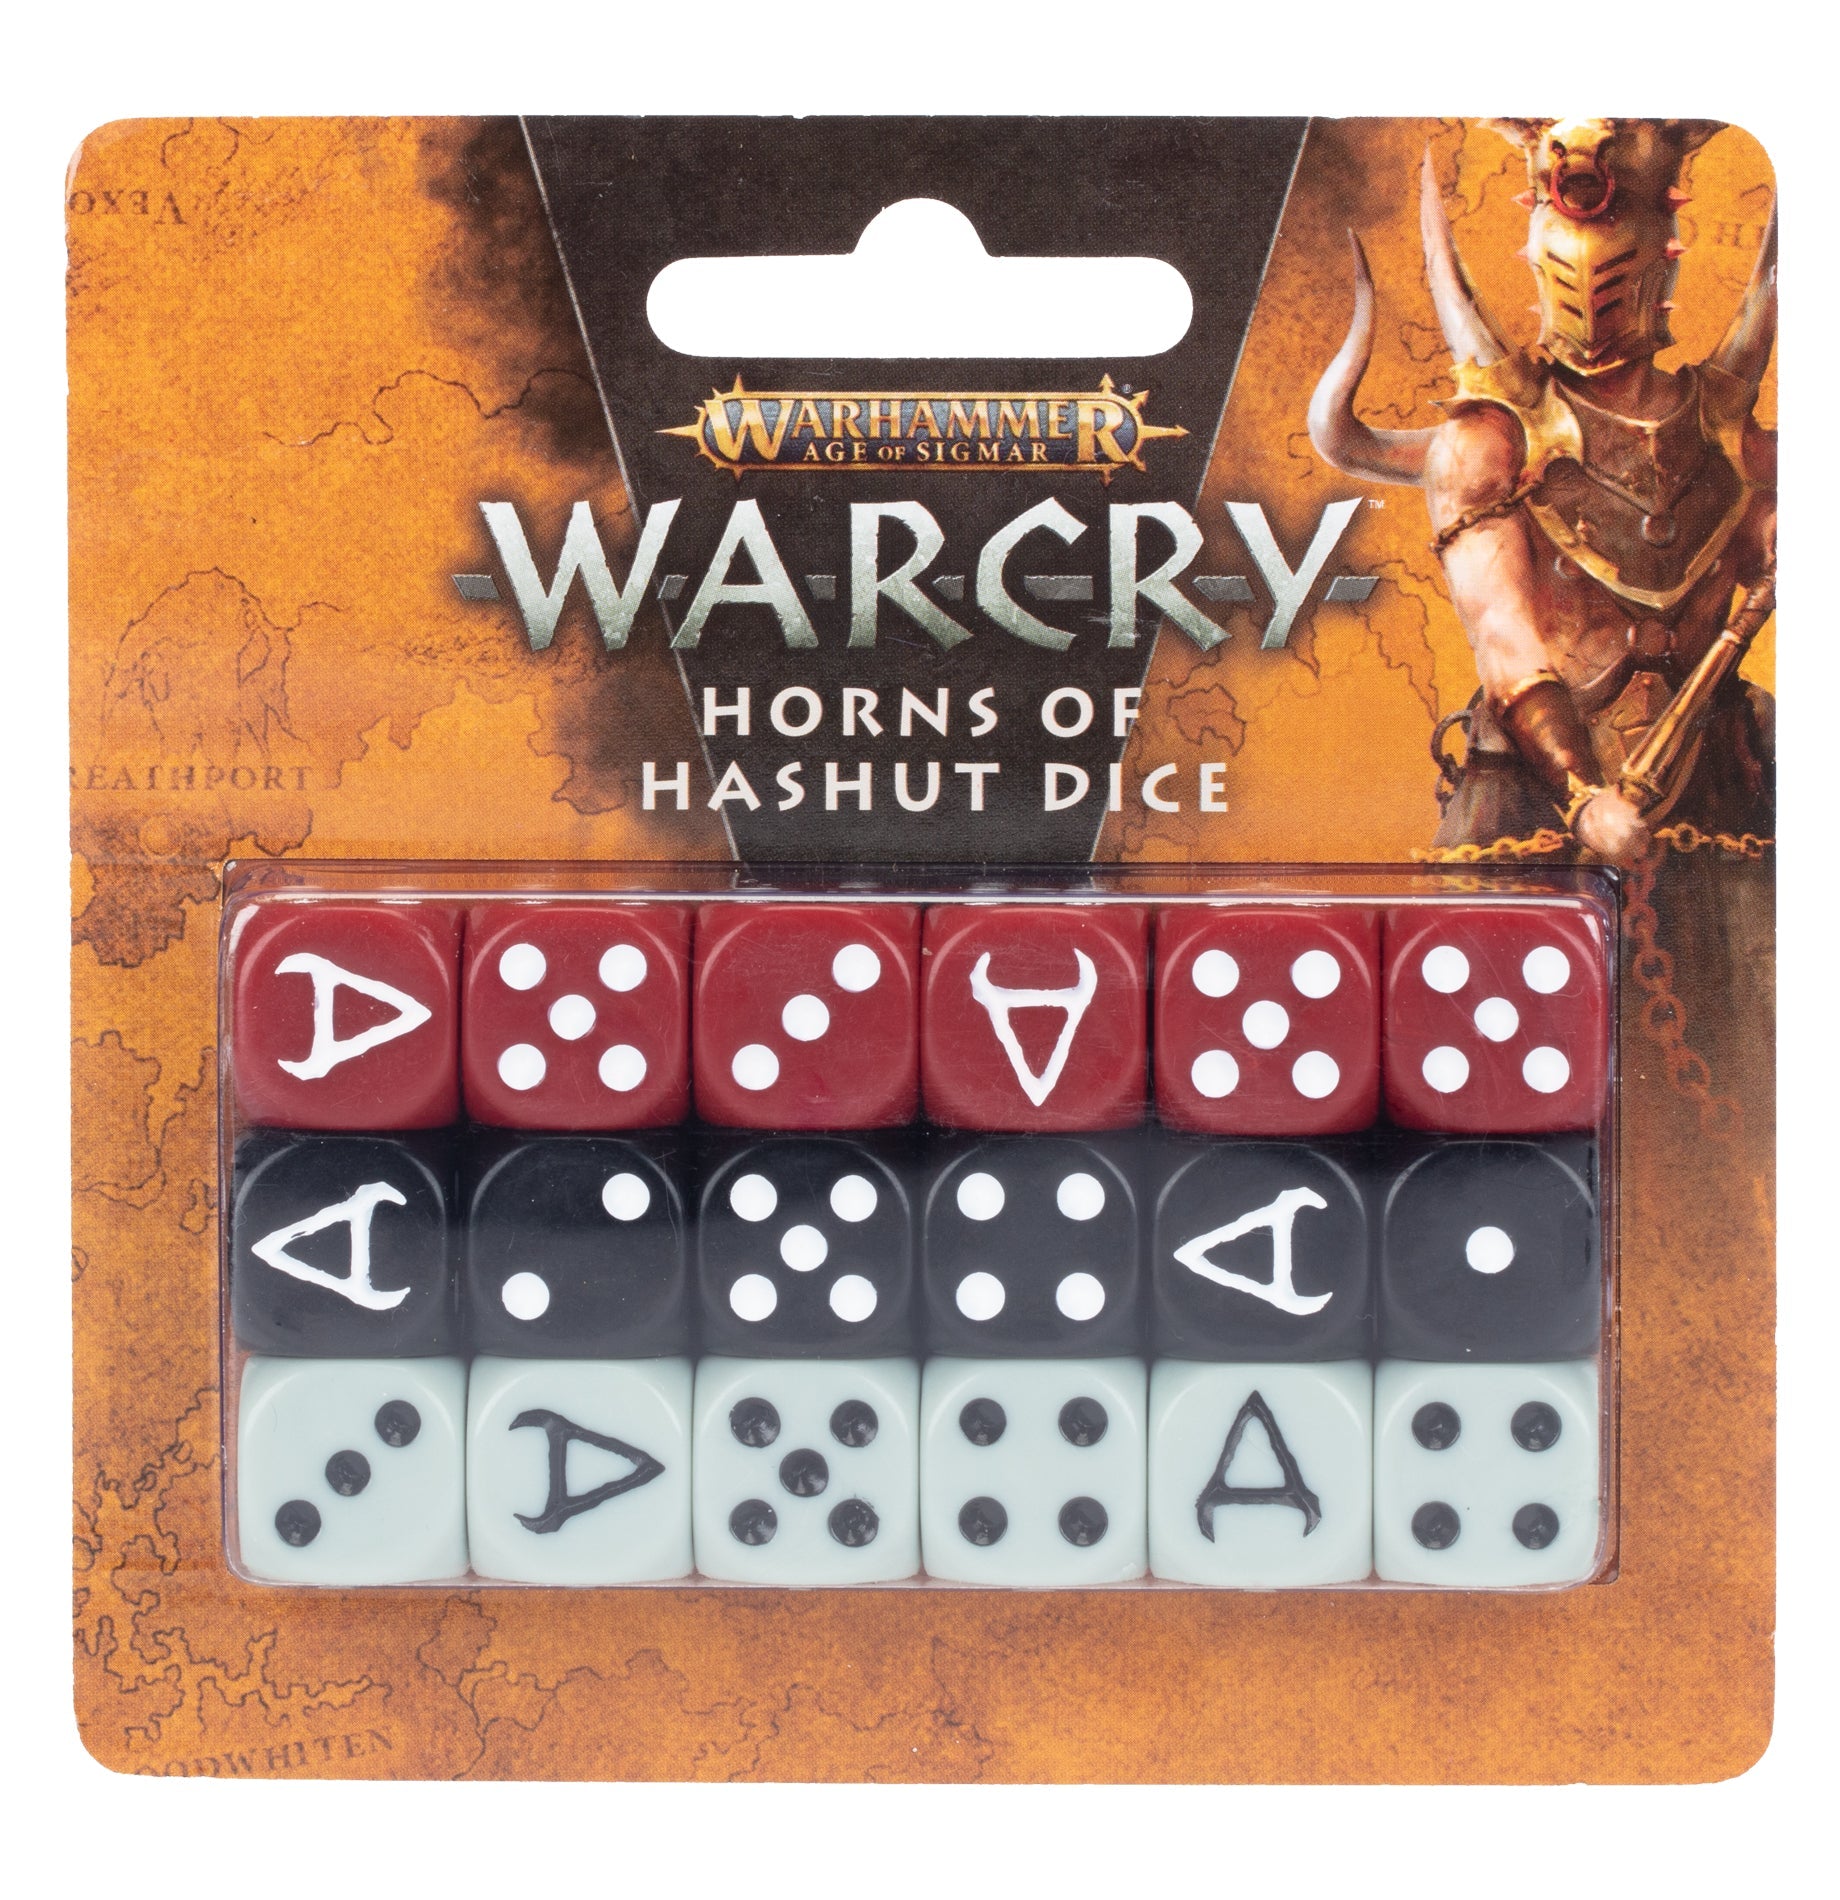 Warcry: Horns of Hashut Dice - Gamescape